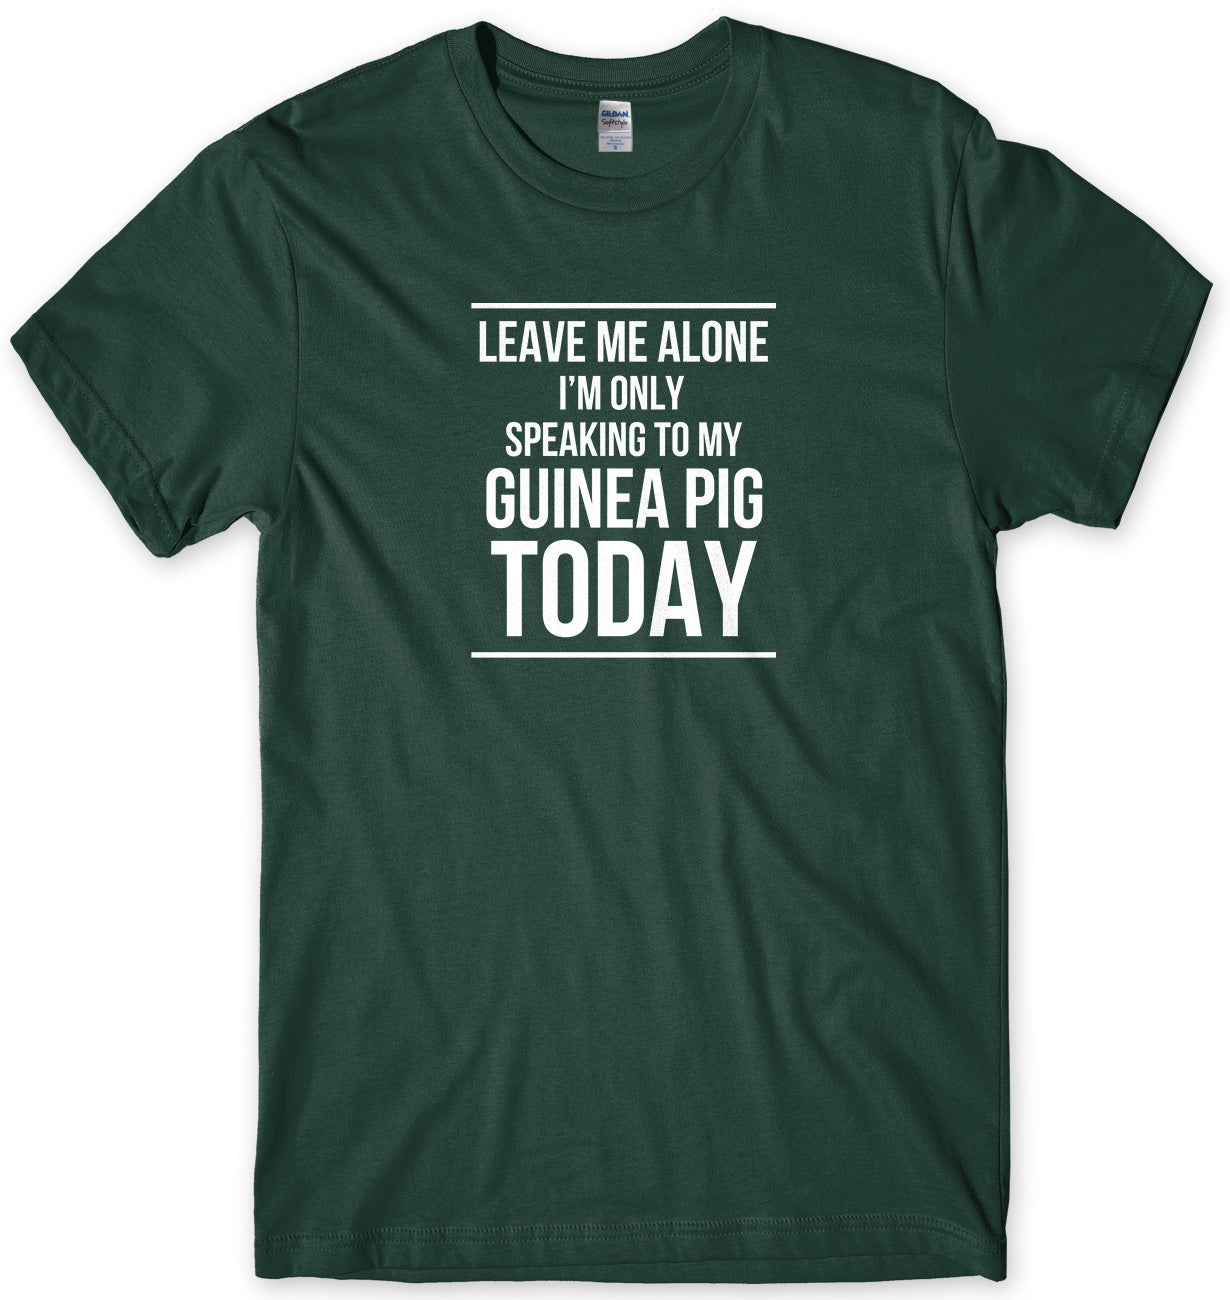 LEAVE ME ALONE I'M ONLY SPEAKING TO MY GUINEA PIG TODAY MENS FUNNY SLOGAN UNISEX T-SHIRT